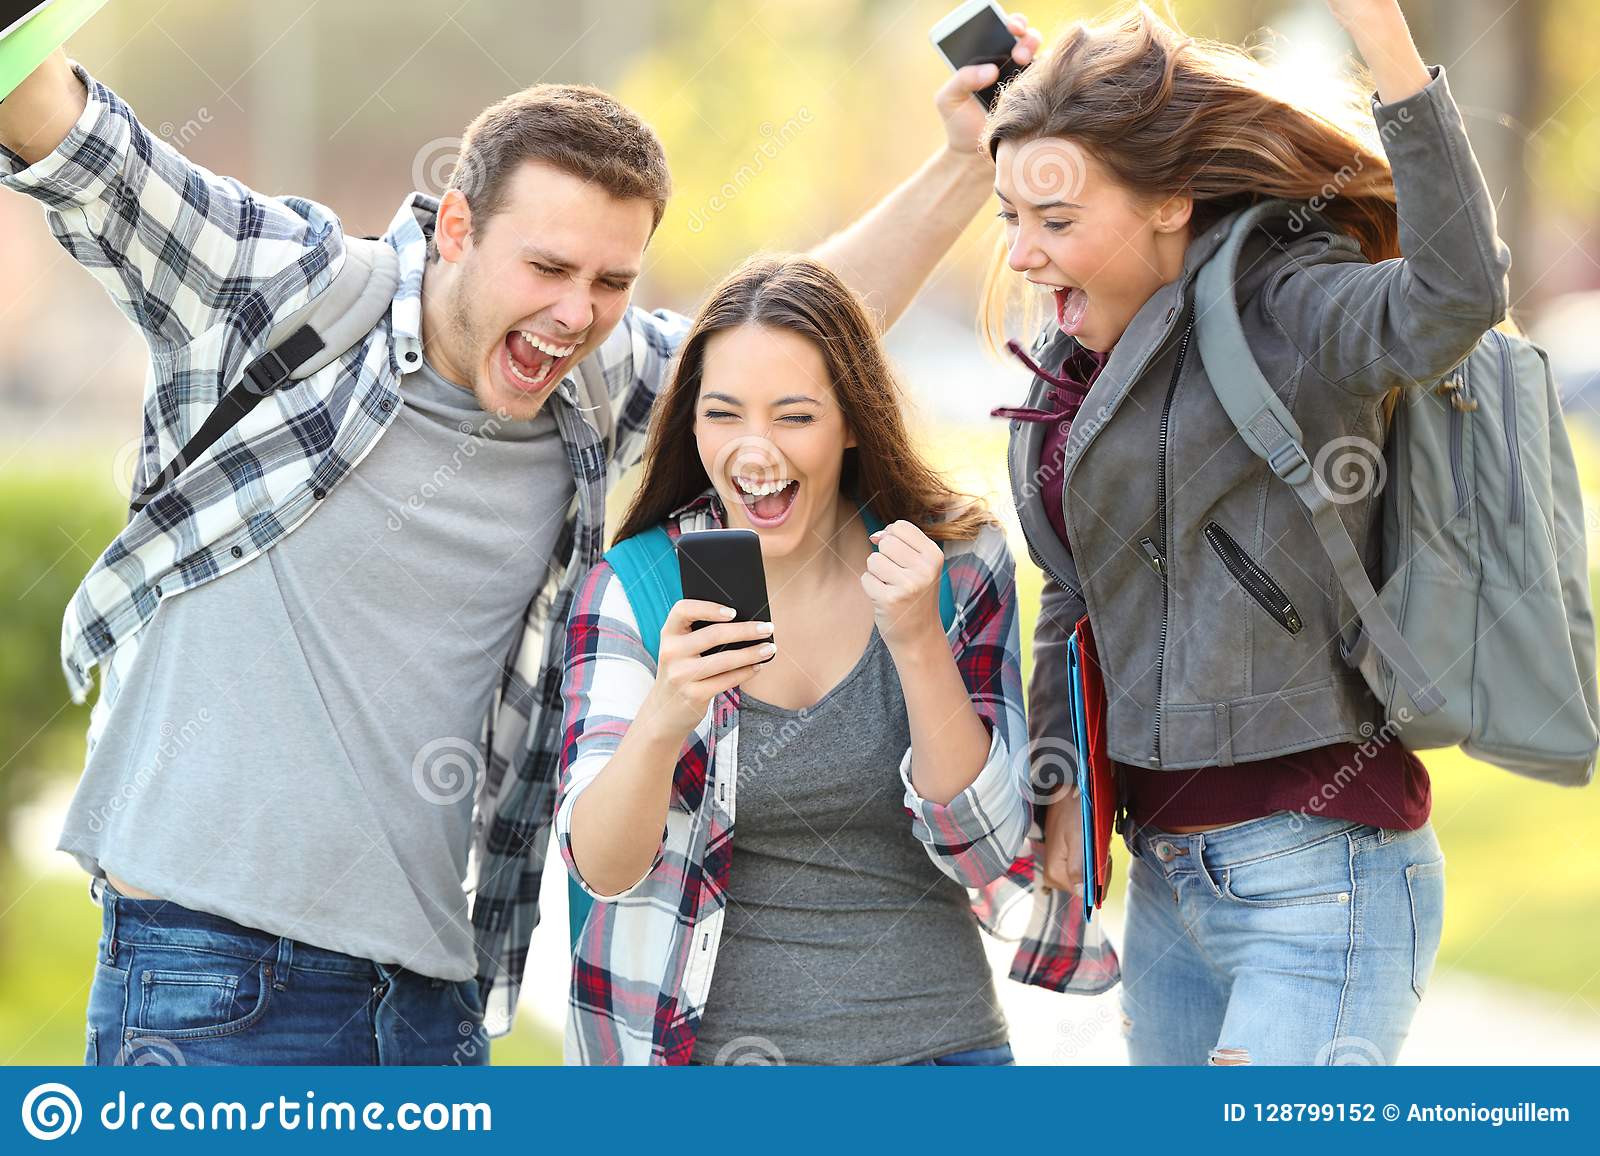 excited-students-checking-exam-grades-online-three-smart-phone-128799152.jpg